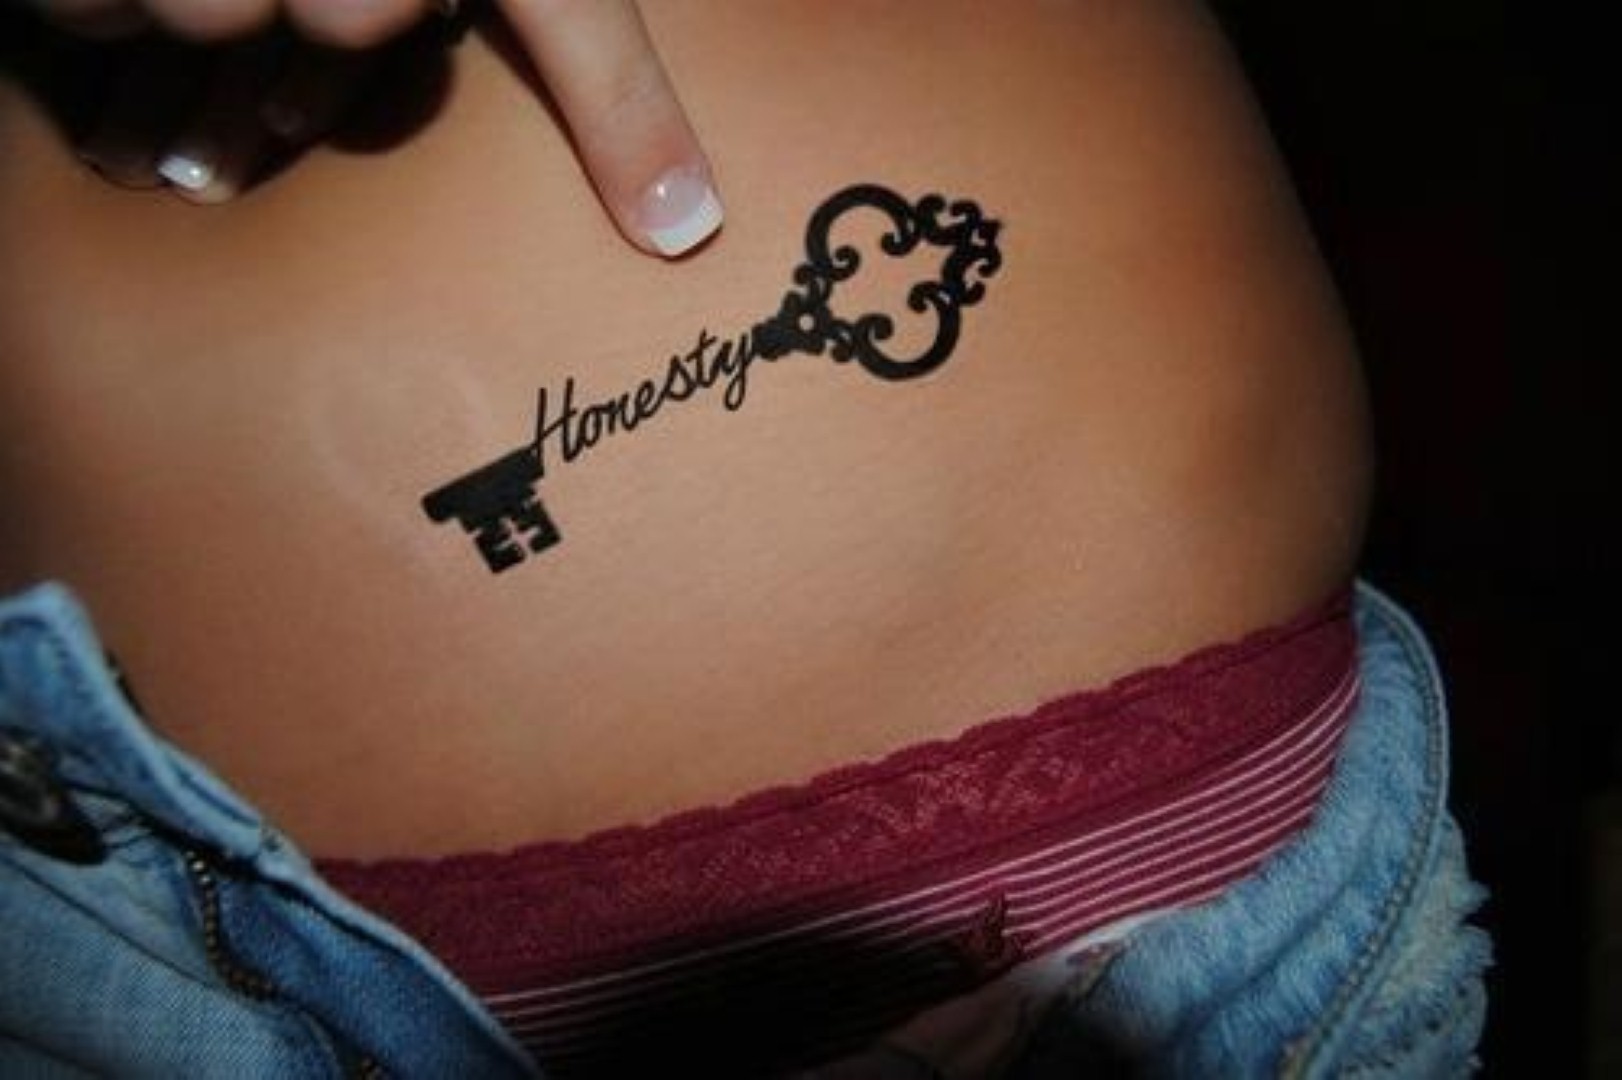 Honesty Word With Key Tattoo Design For Hip